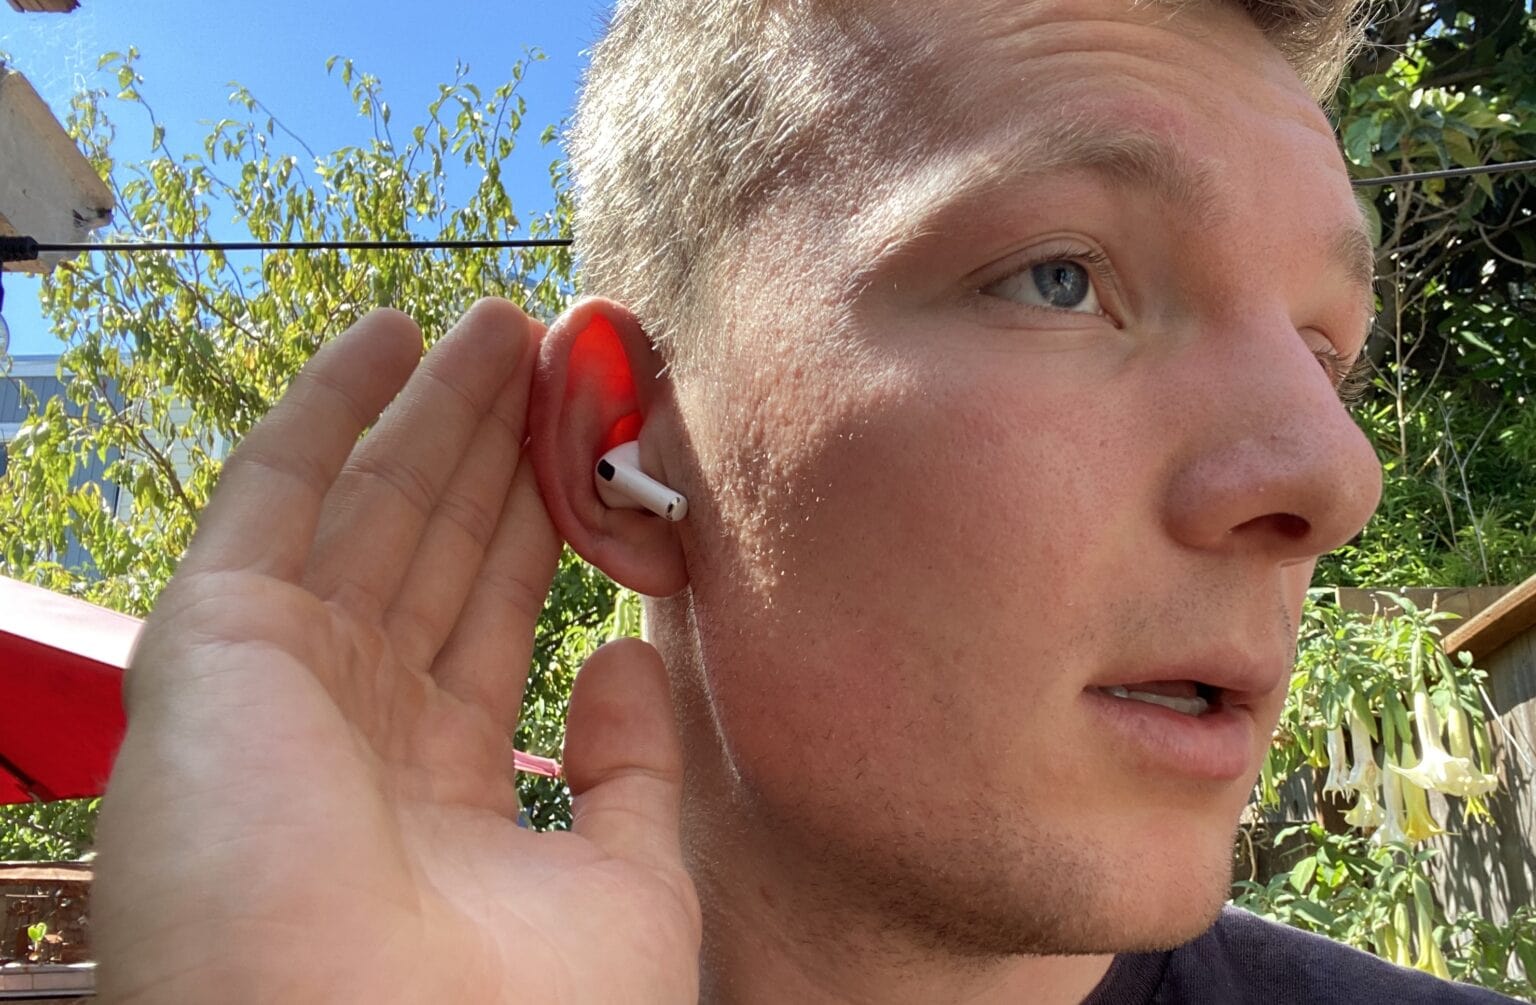 AirPods Pro and Transparency Mode make for fine hearing aids.